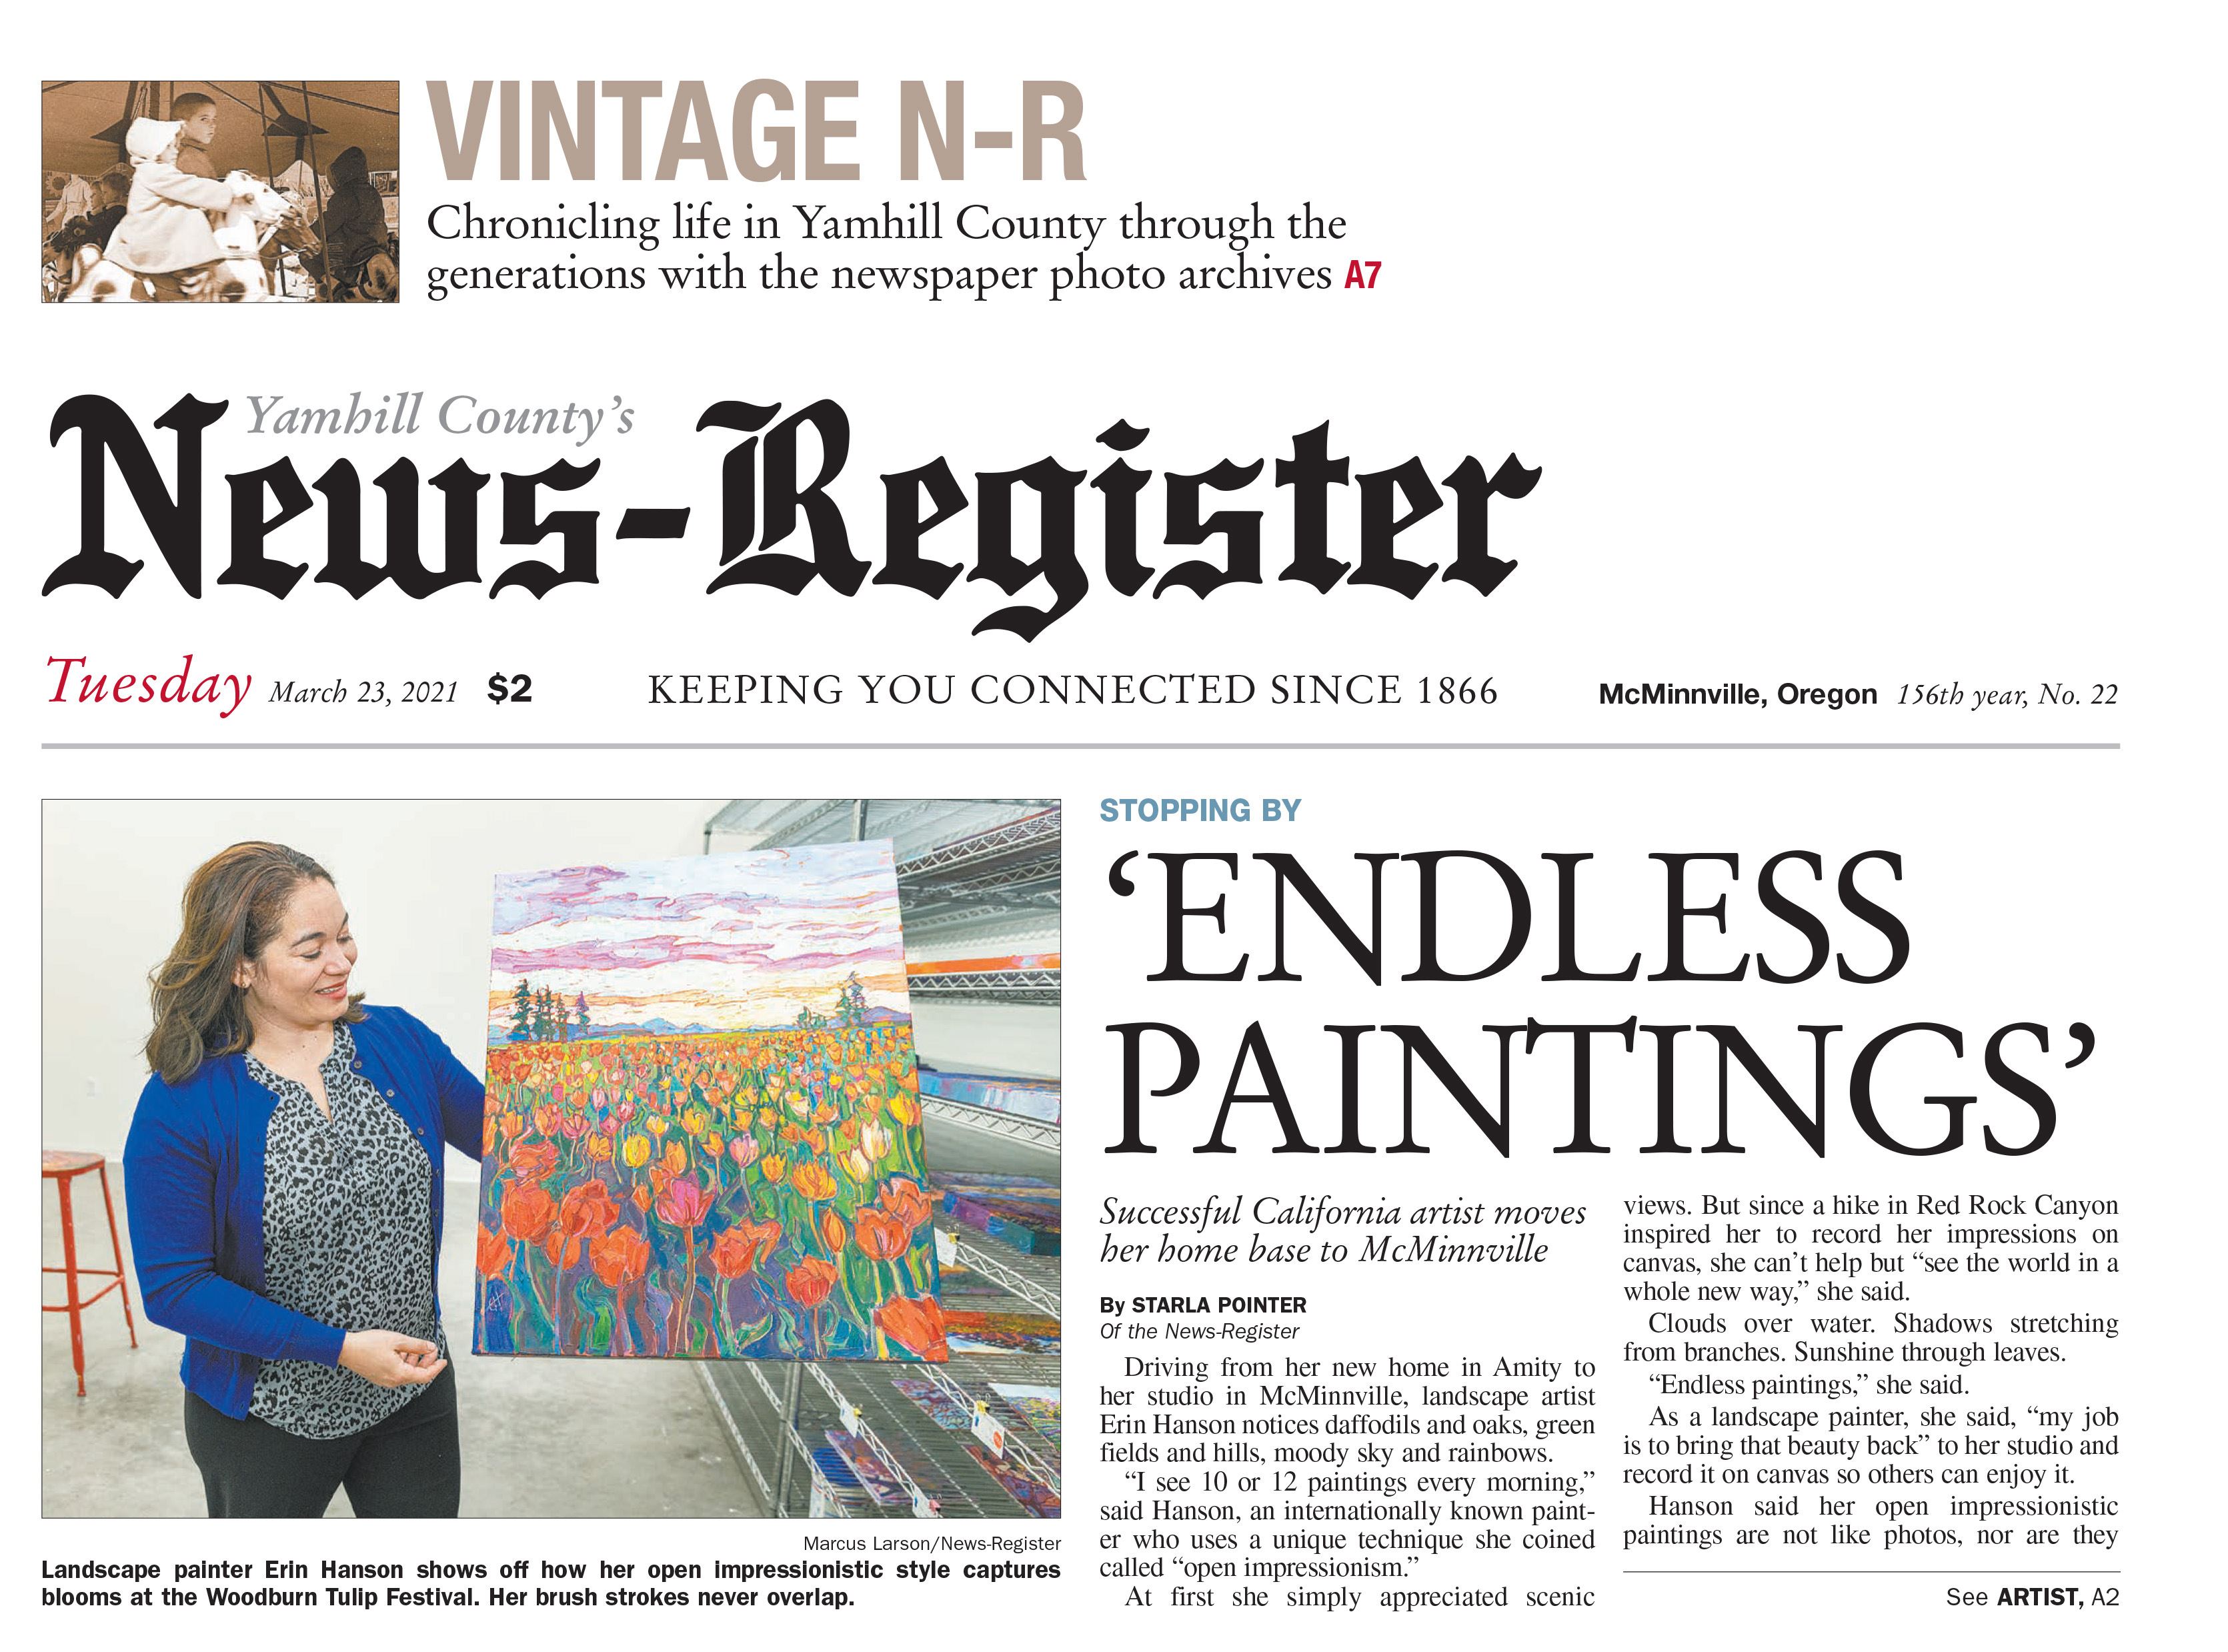 News Register article featuring Erin Hanson title 'Endless Paintings'